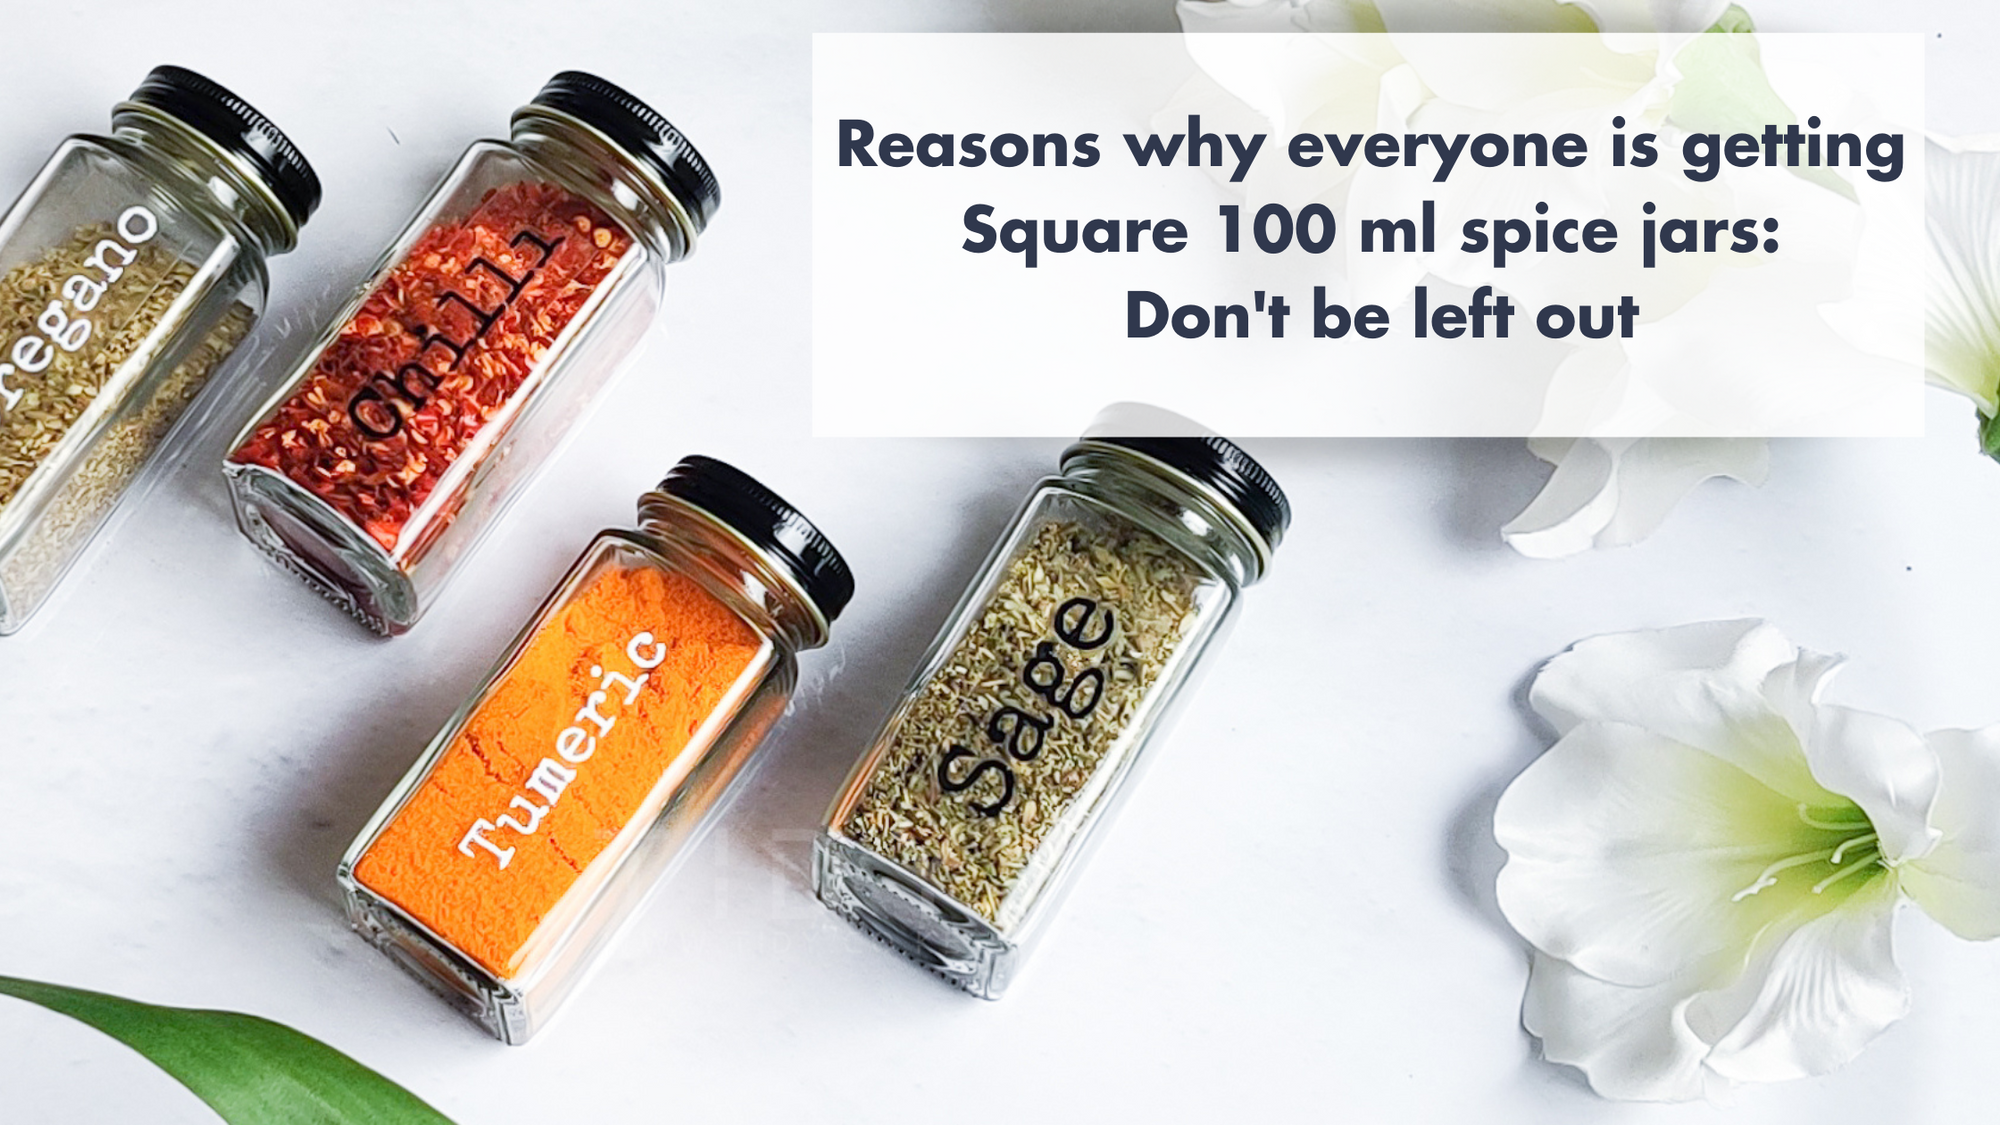 Reasons why everyone is getting Square 100 ml spice jars: Don't be left out